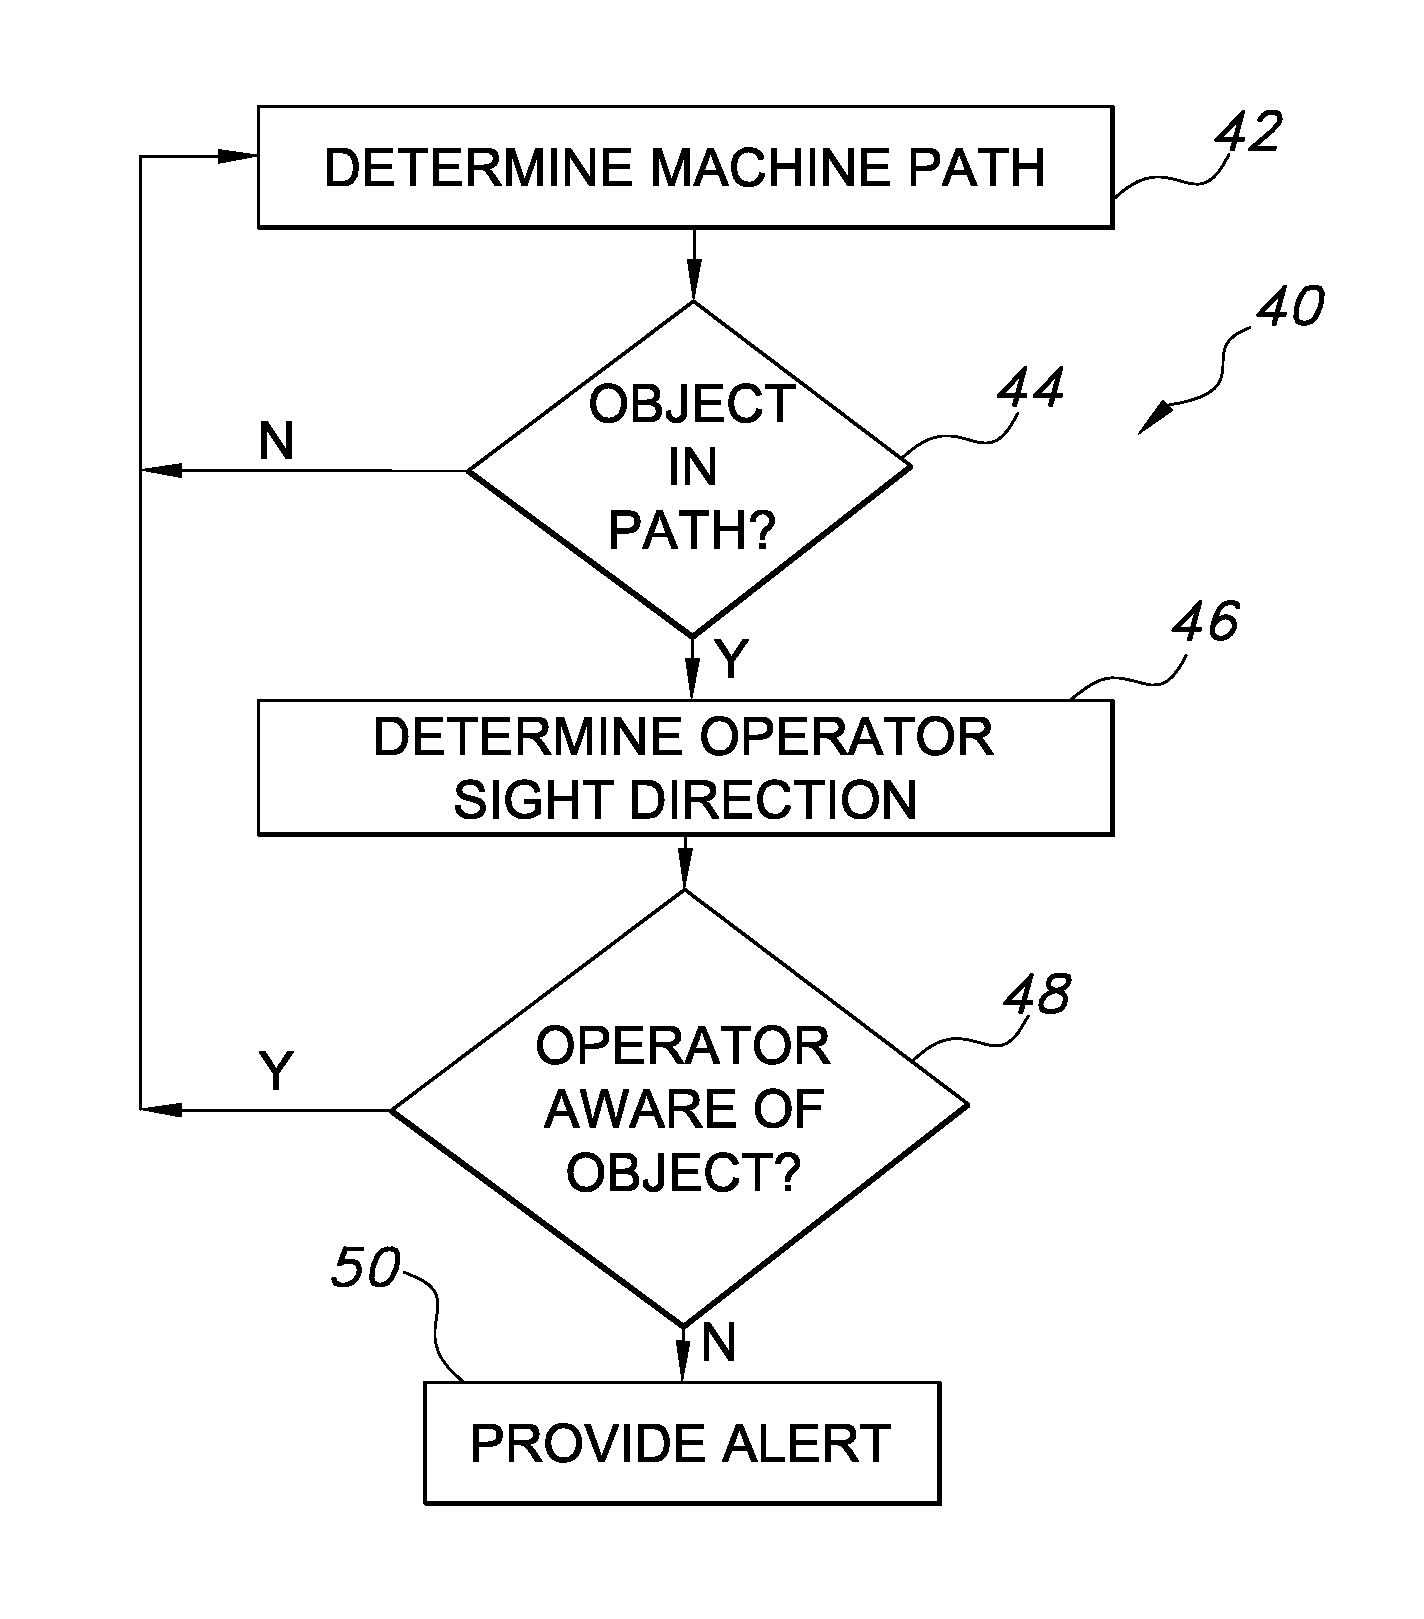 Method of detecting and improving operator situational awareness on agricultural machines